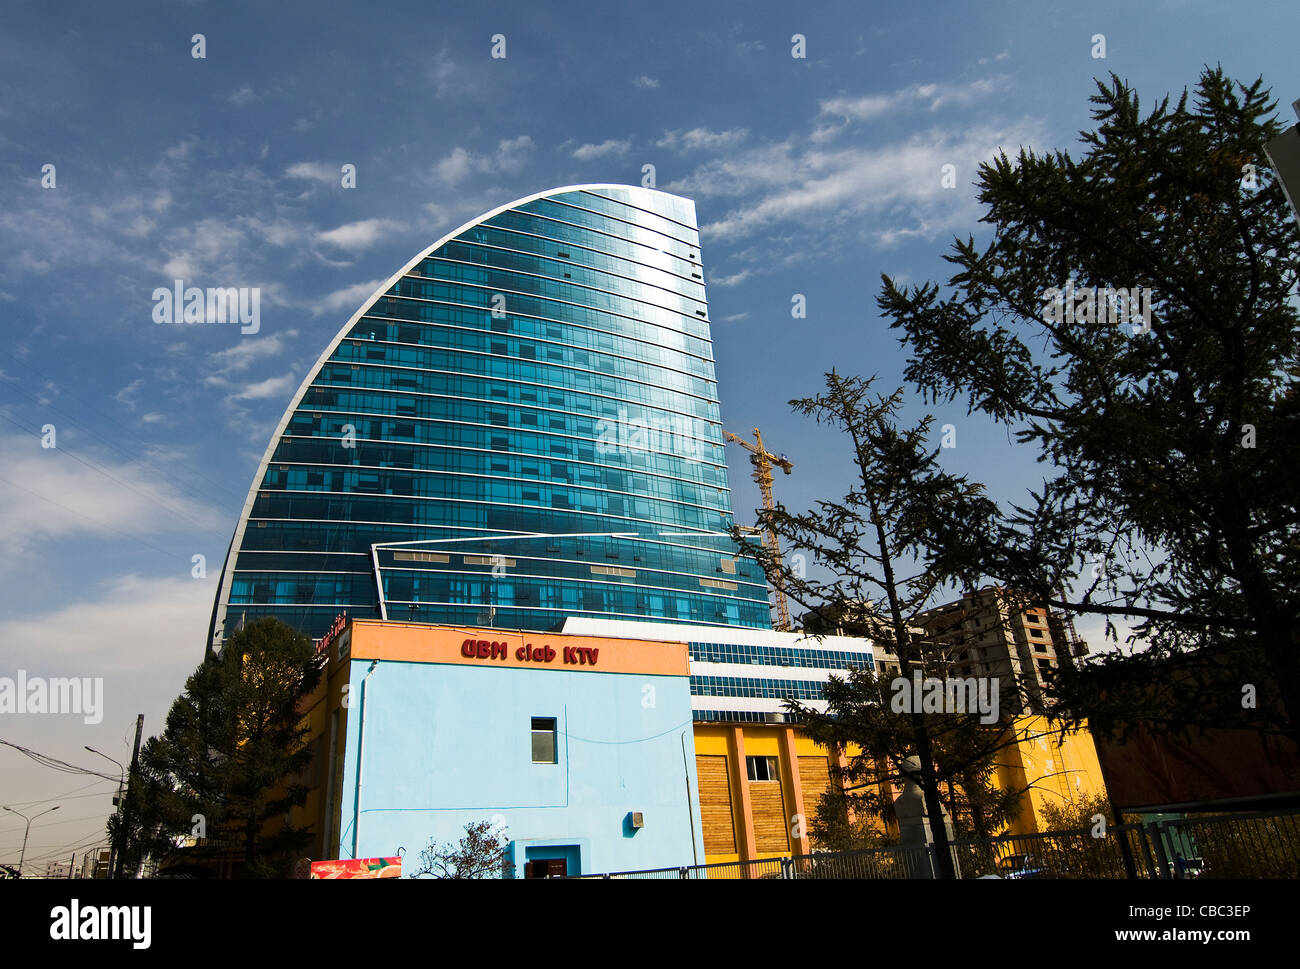 Ulan bator is seeing rapid changes. new modern commercial buildings are changing the city's skyline. Stock Photo